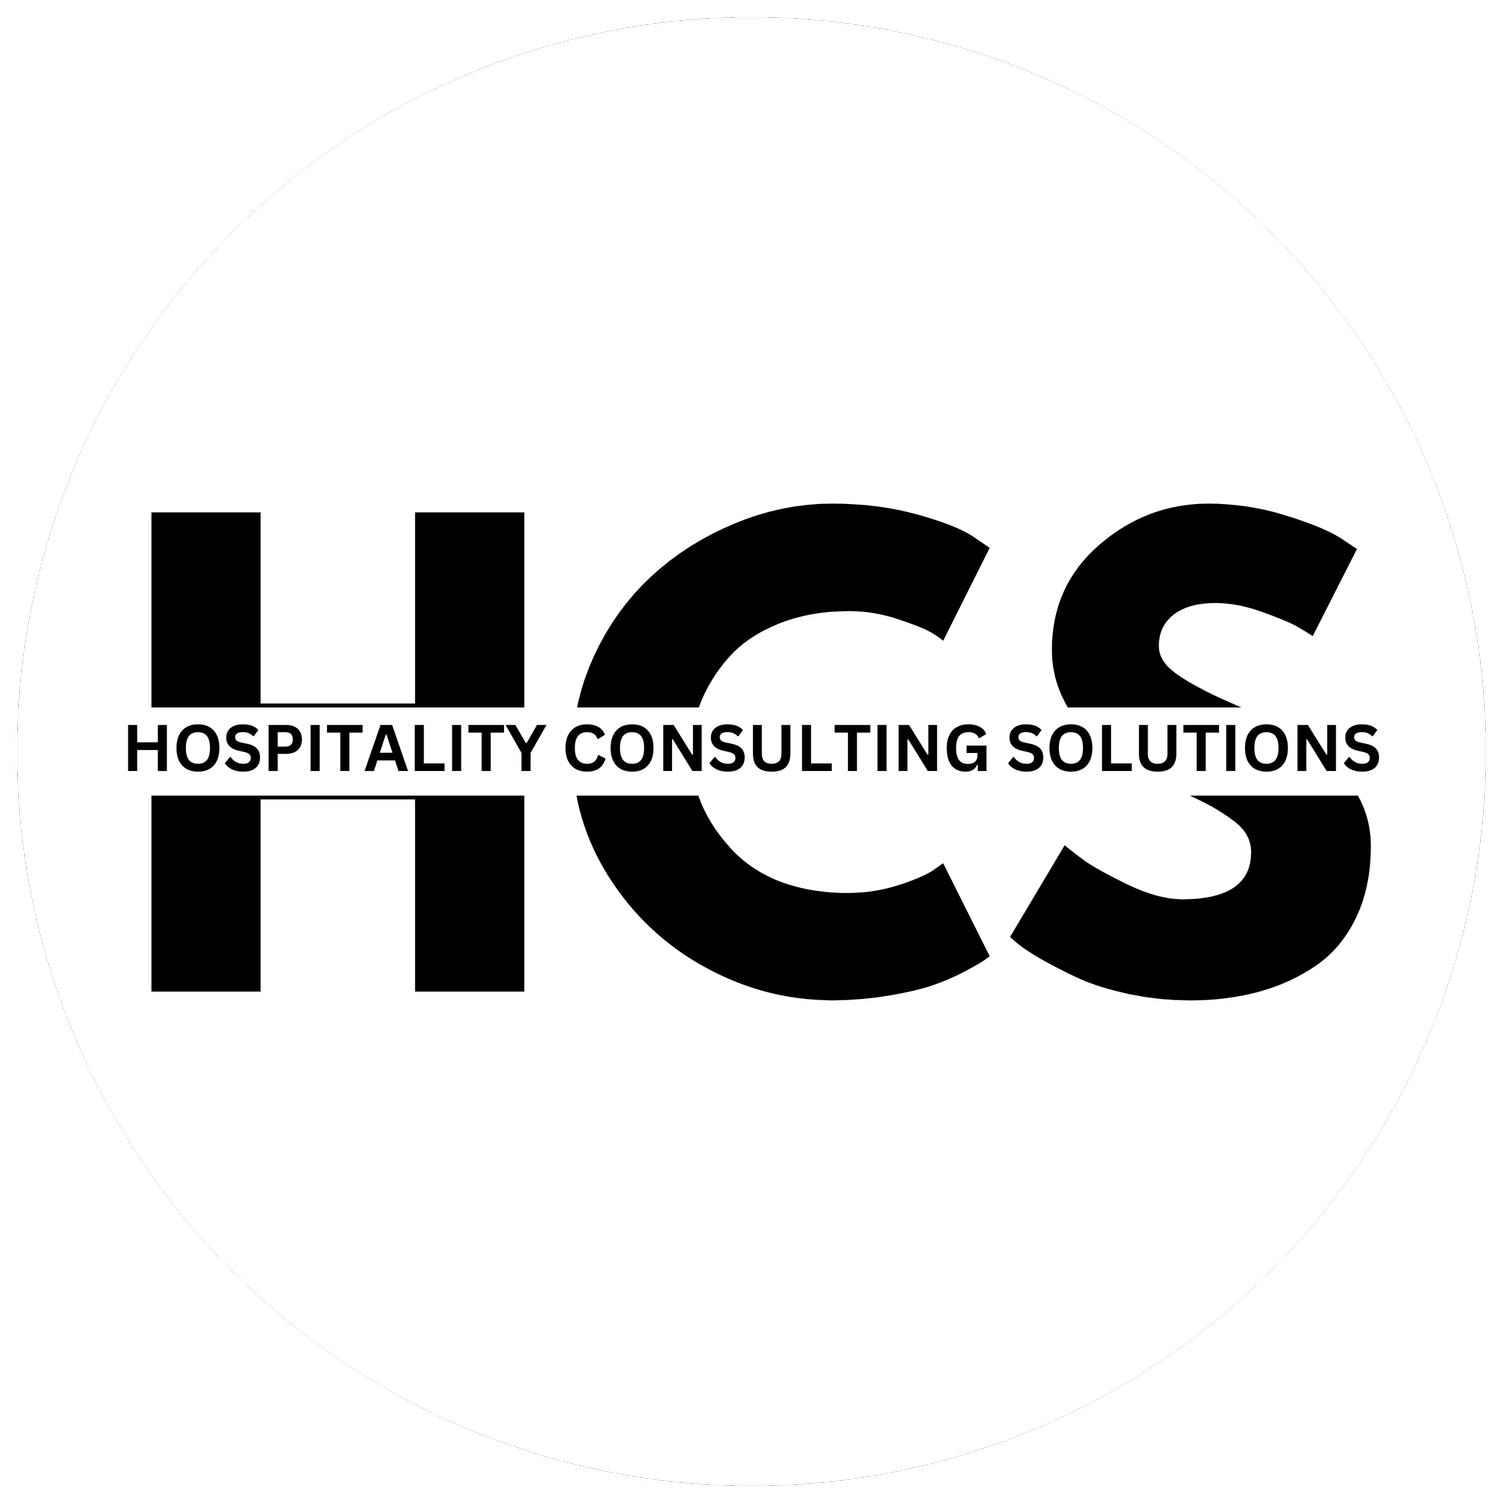 Hospitality Consulting Solutions